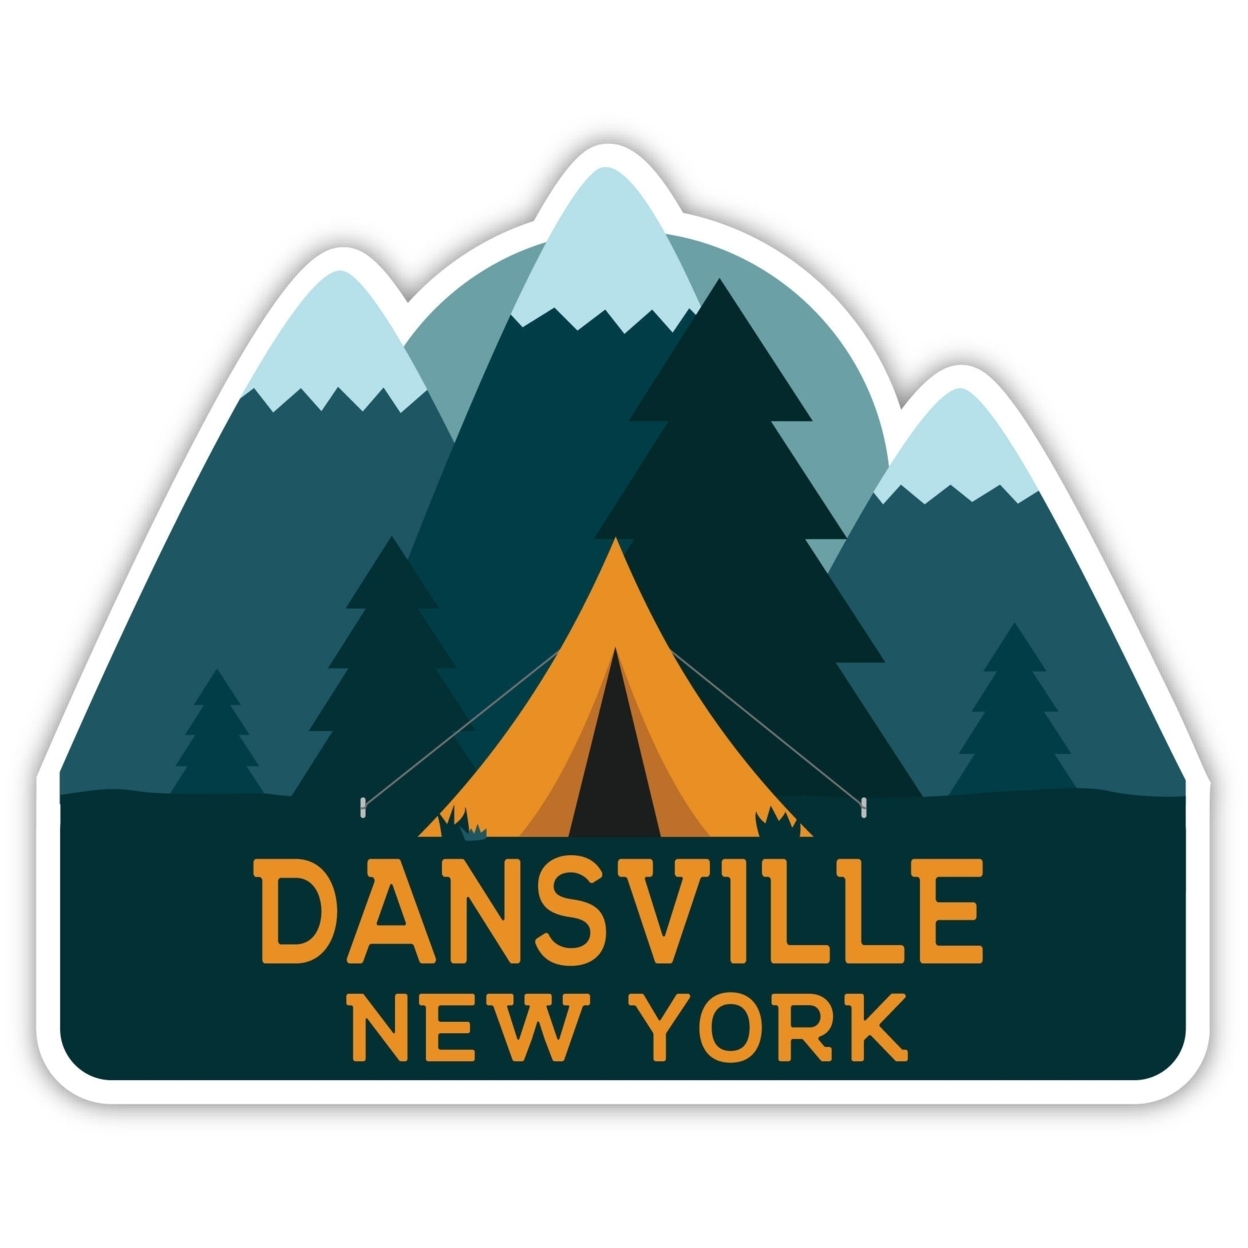 Dansville New York Souvenir Decorative Stickers (Choose Theme And Size) - 4-Pack, 8-Inch, Tent